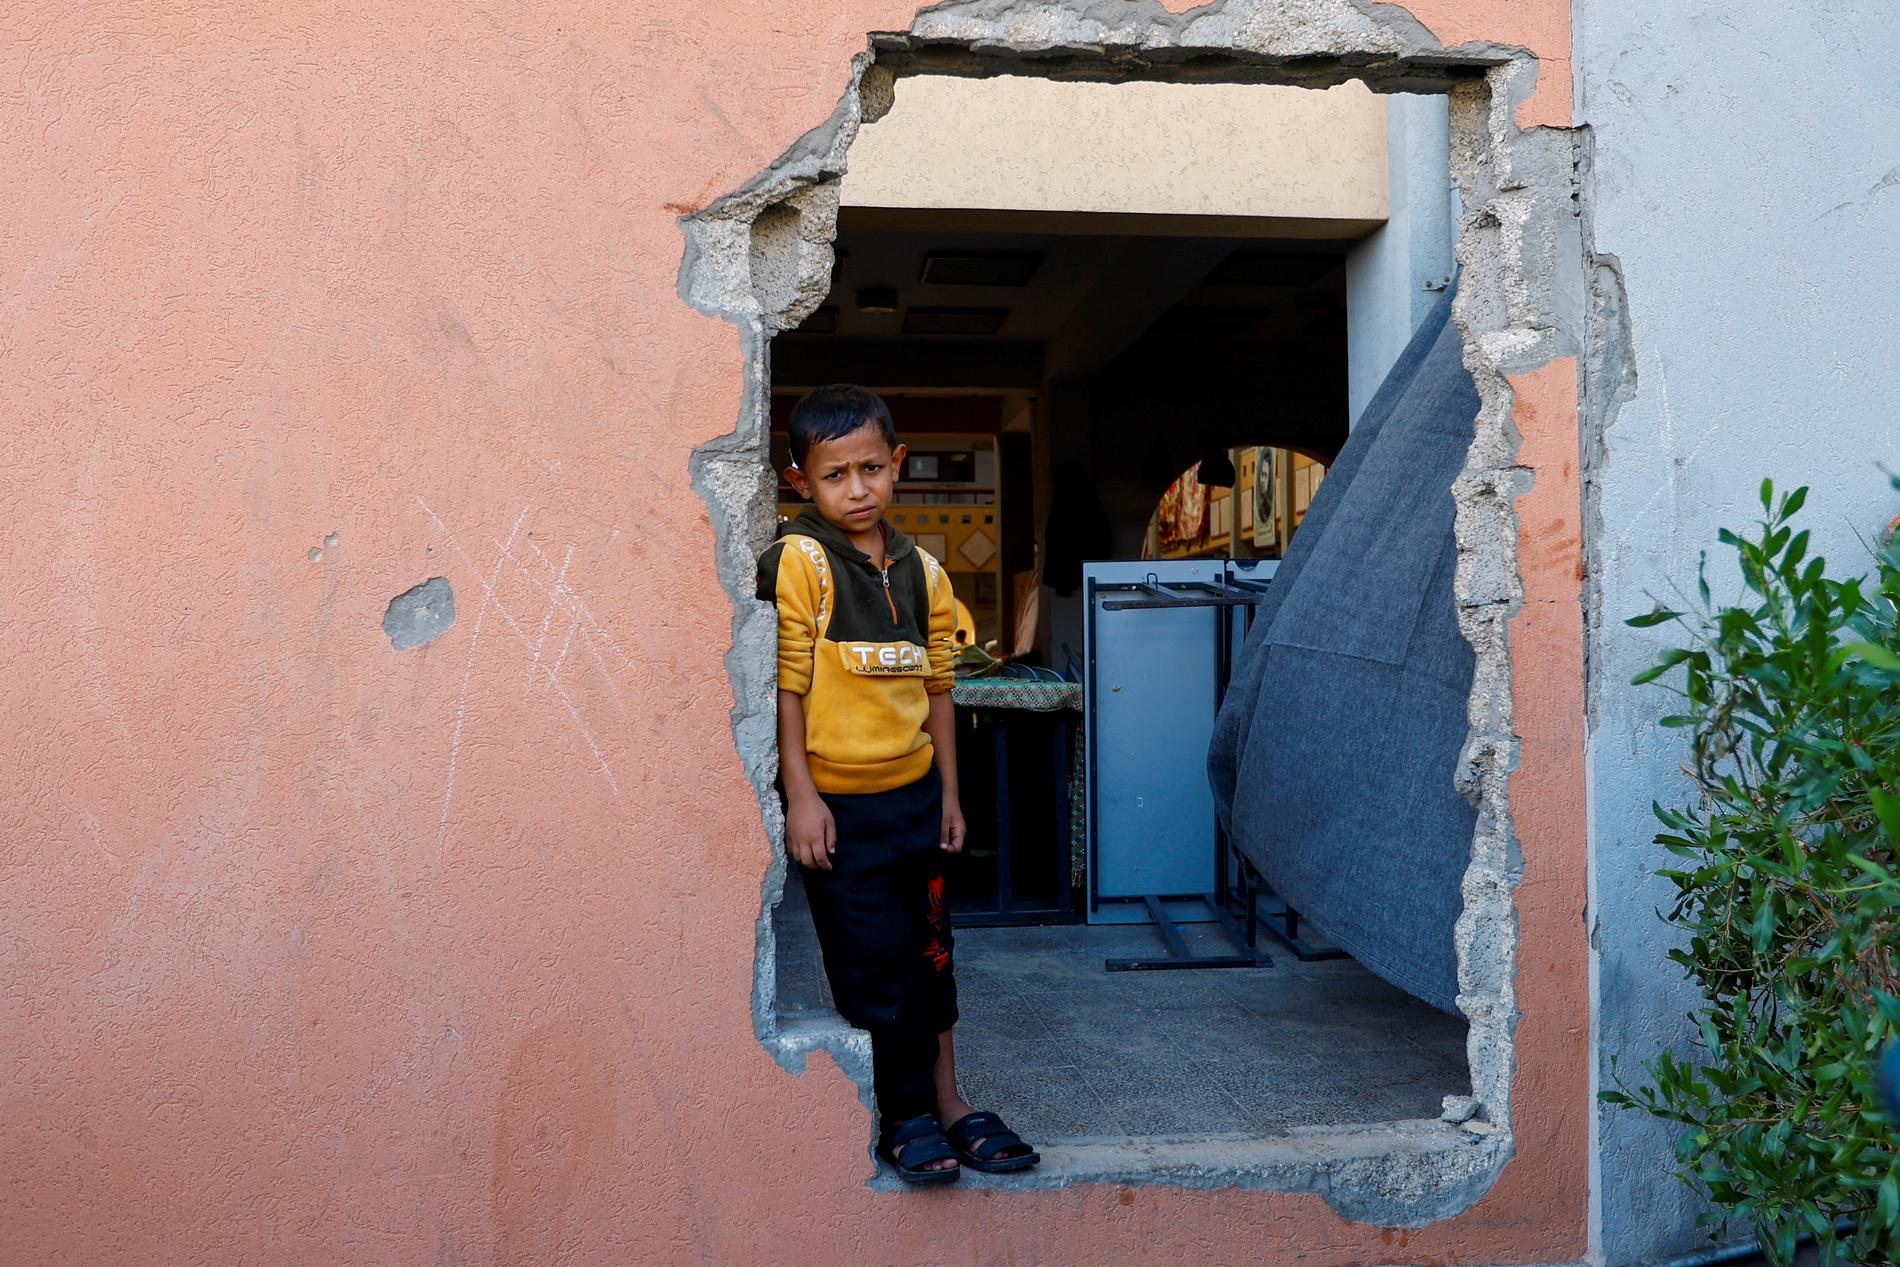 Fleeing civilians: A Palestinian boy looks through a hole in the wall of a school in Khan Yunis in the Gaza Strip.  Hospitals are overcrowded due to the war and the suffering of civilians is increasing every day.